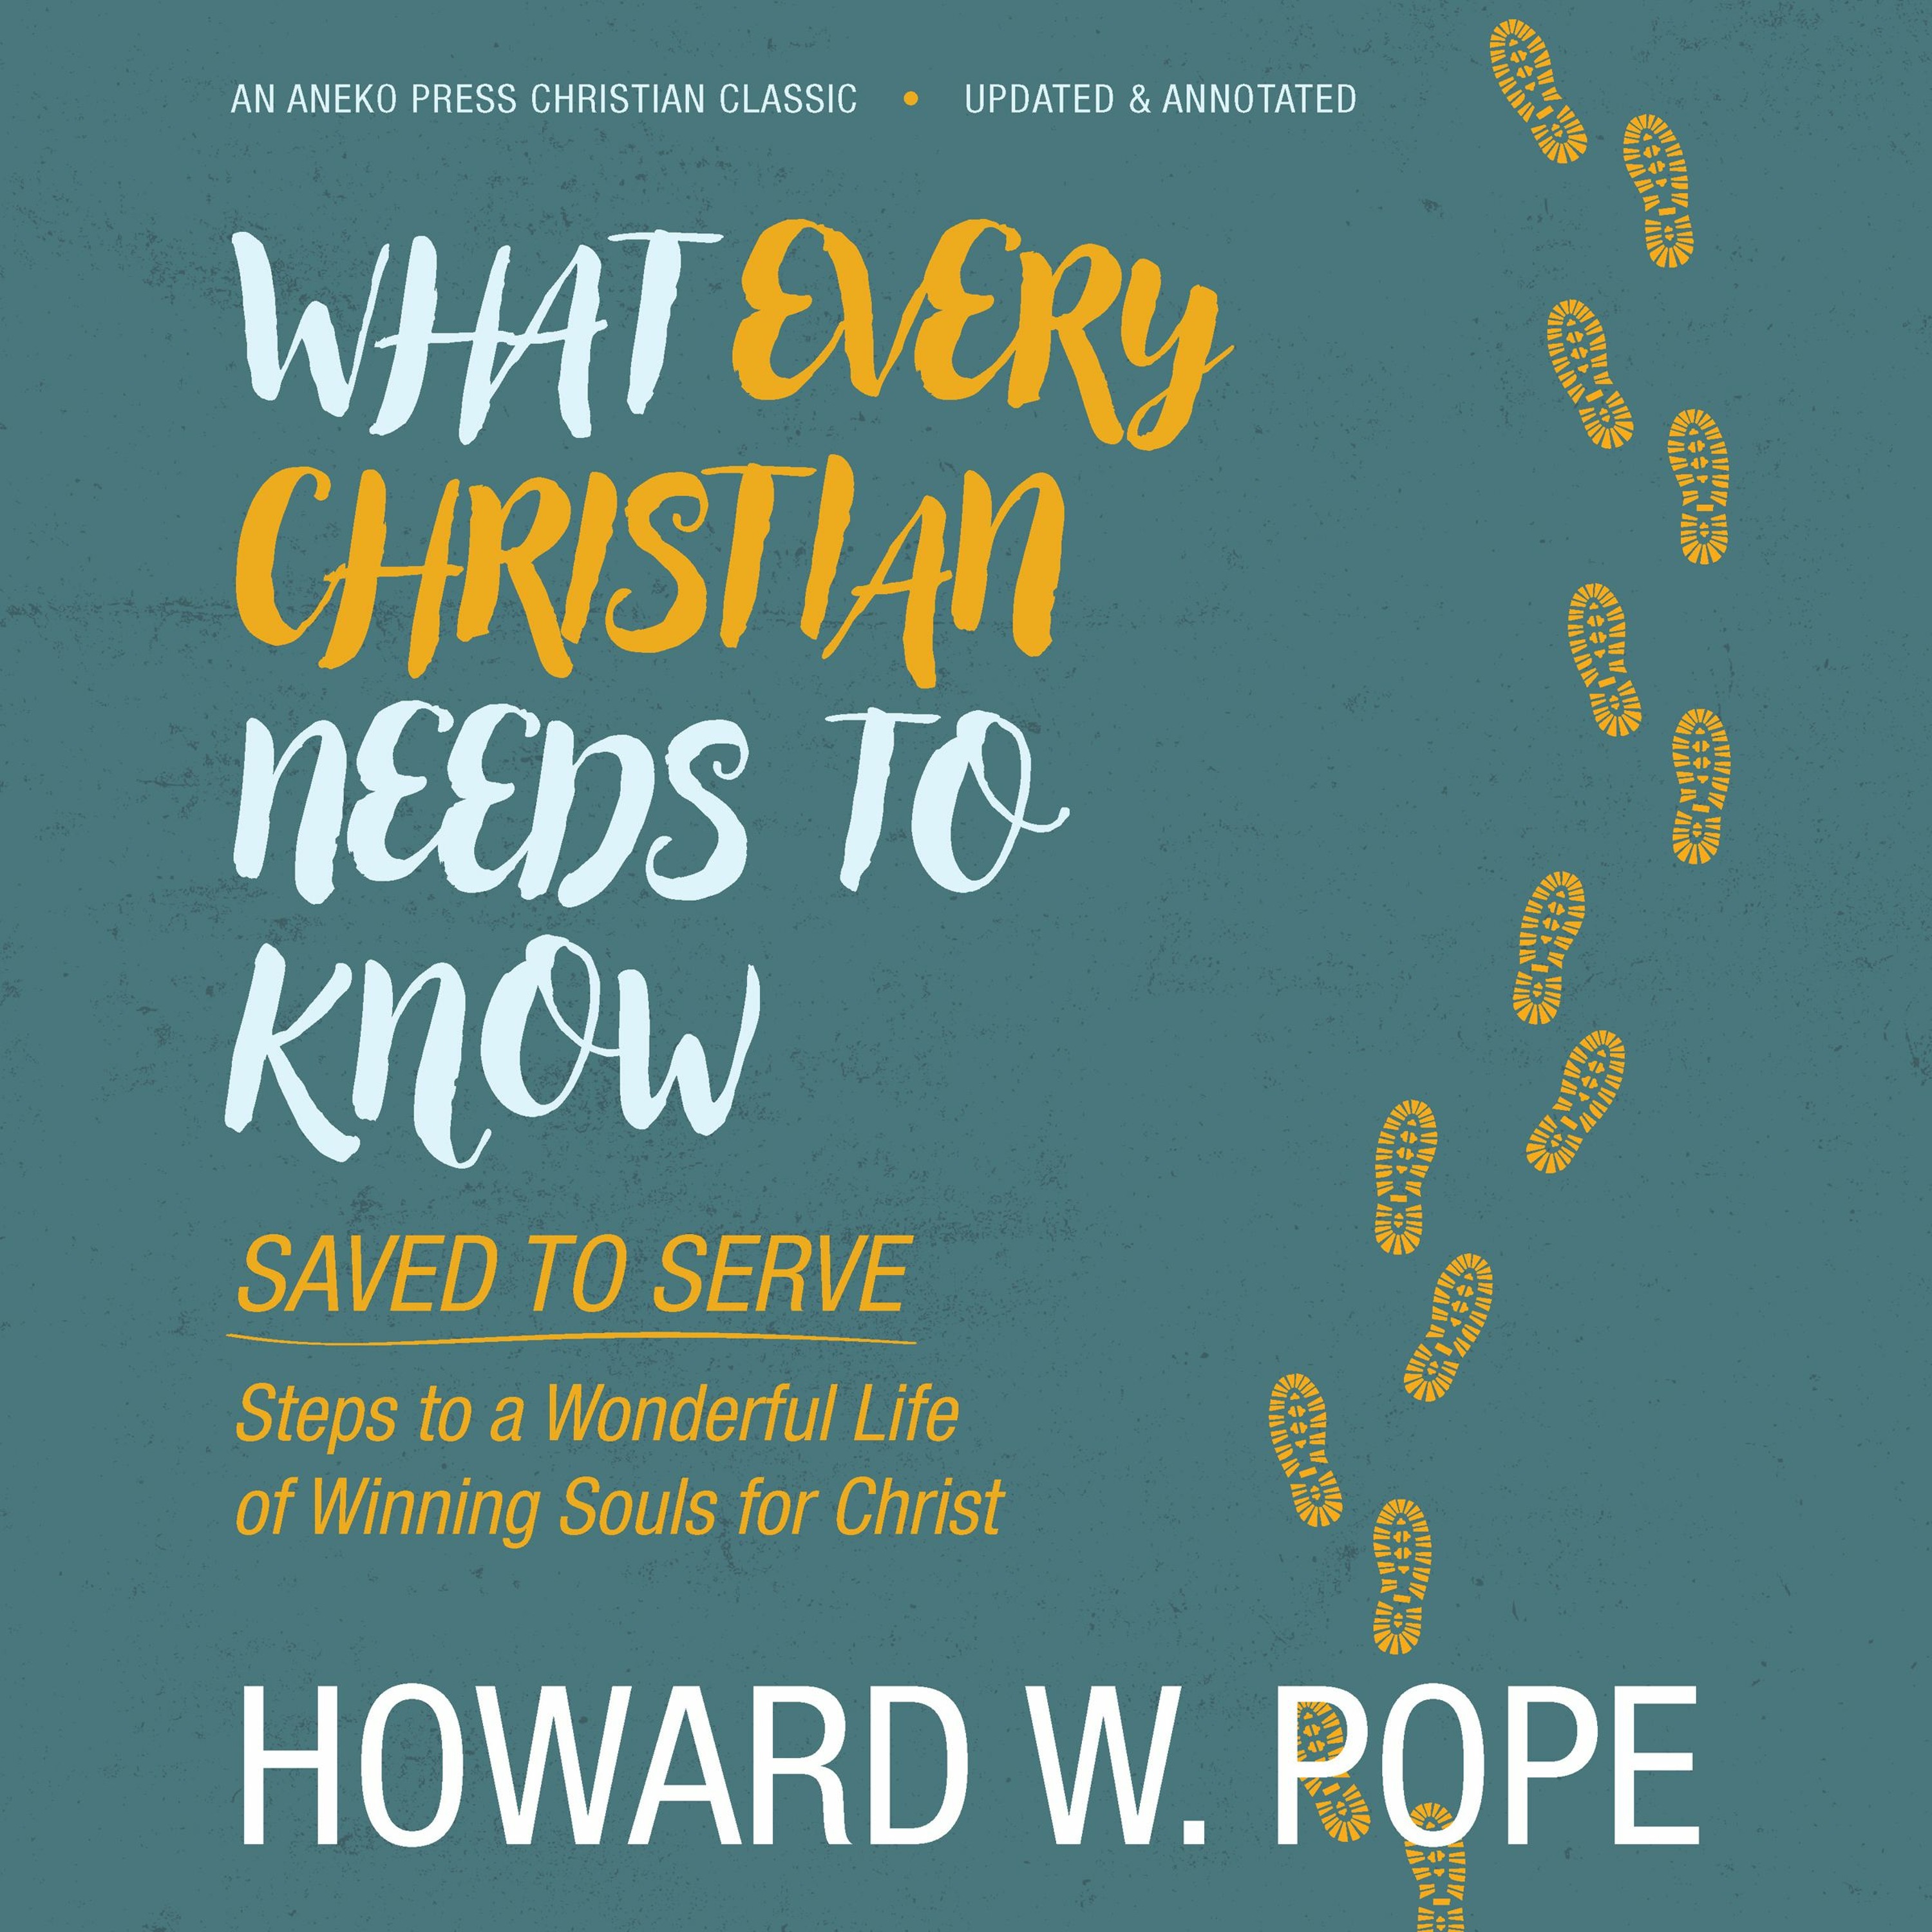 To Whom We Should Speak (Ch. 8) - What Every Christian Needs to Know